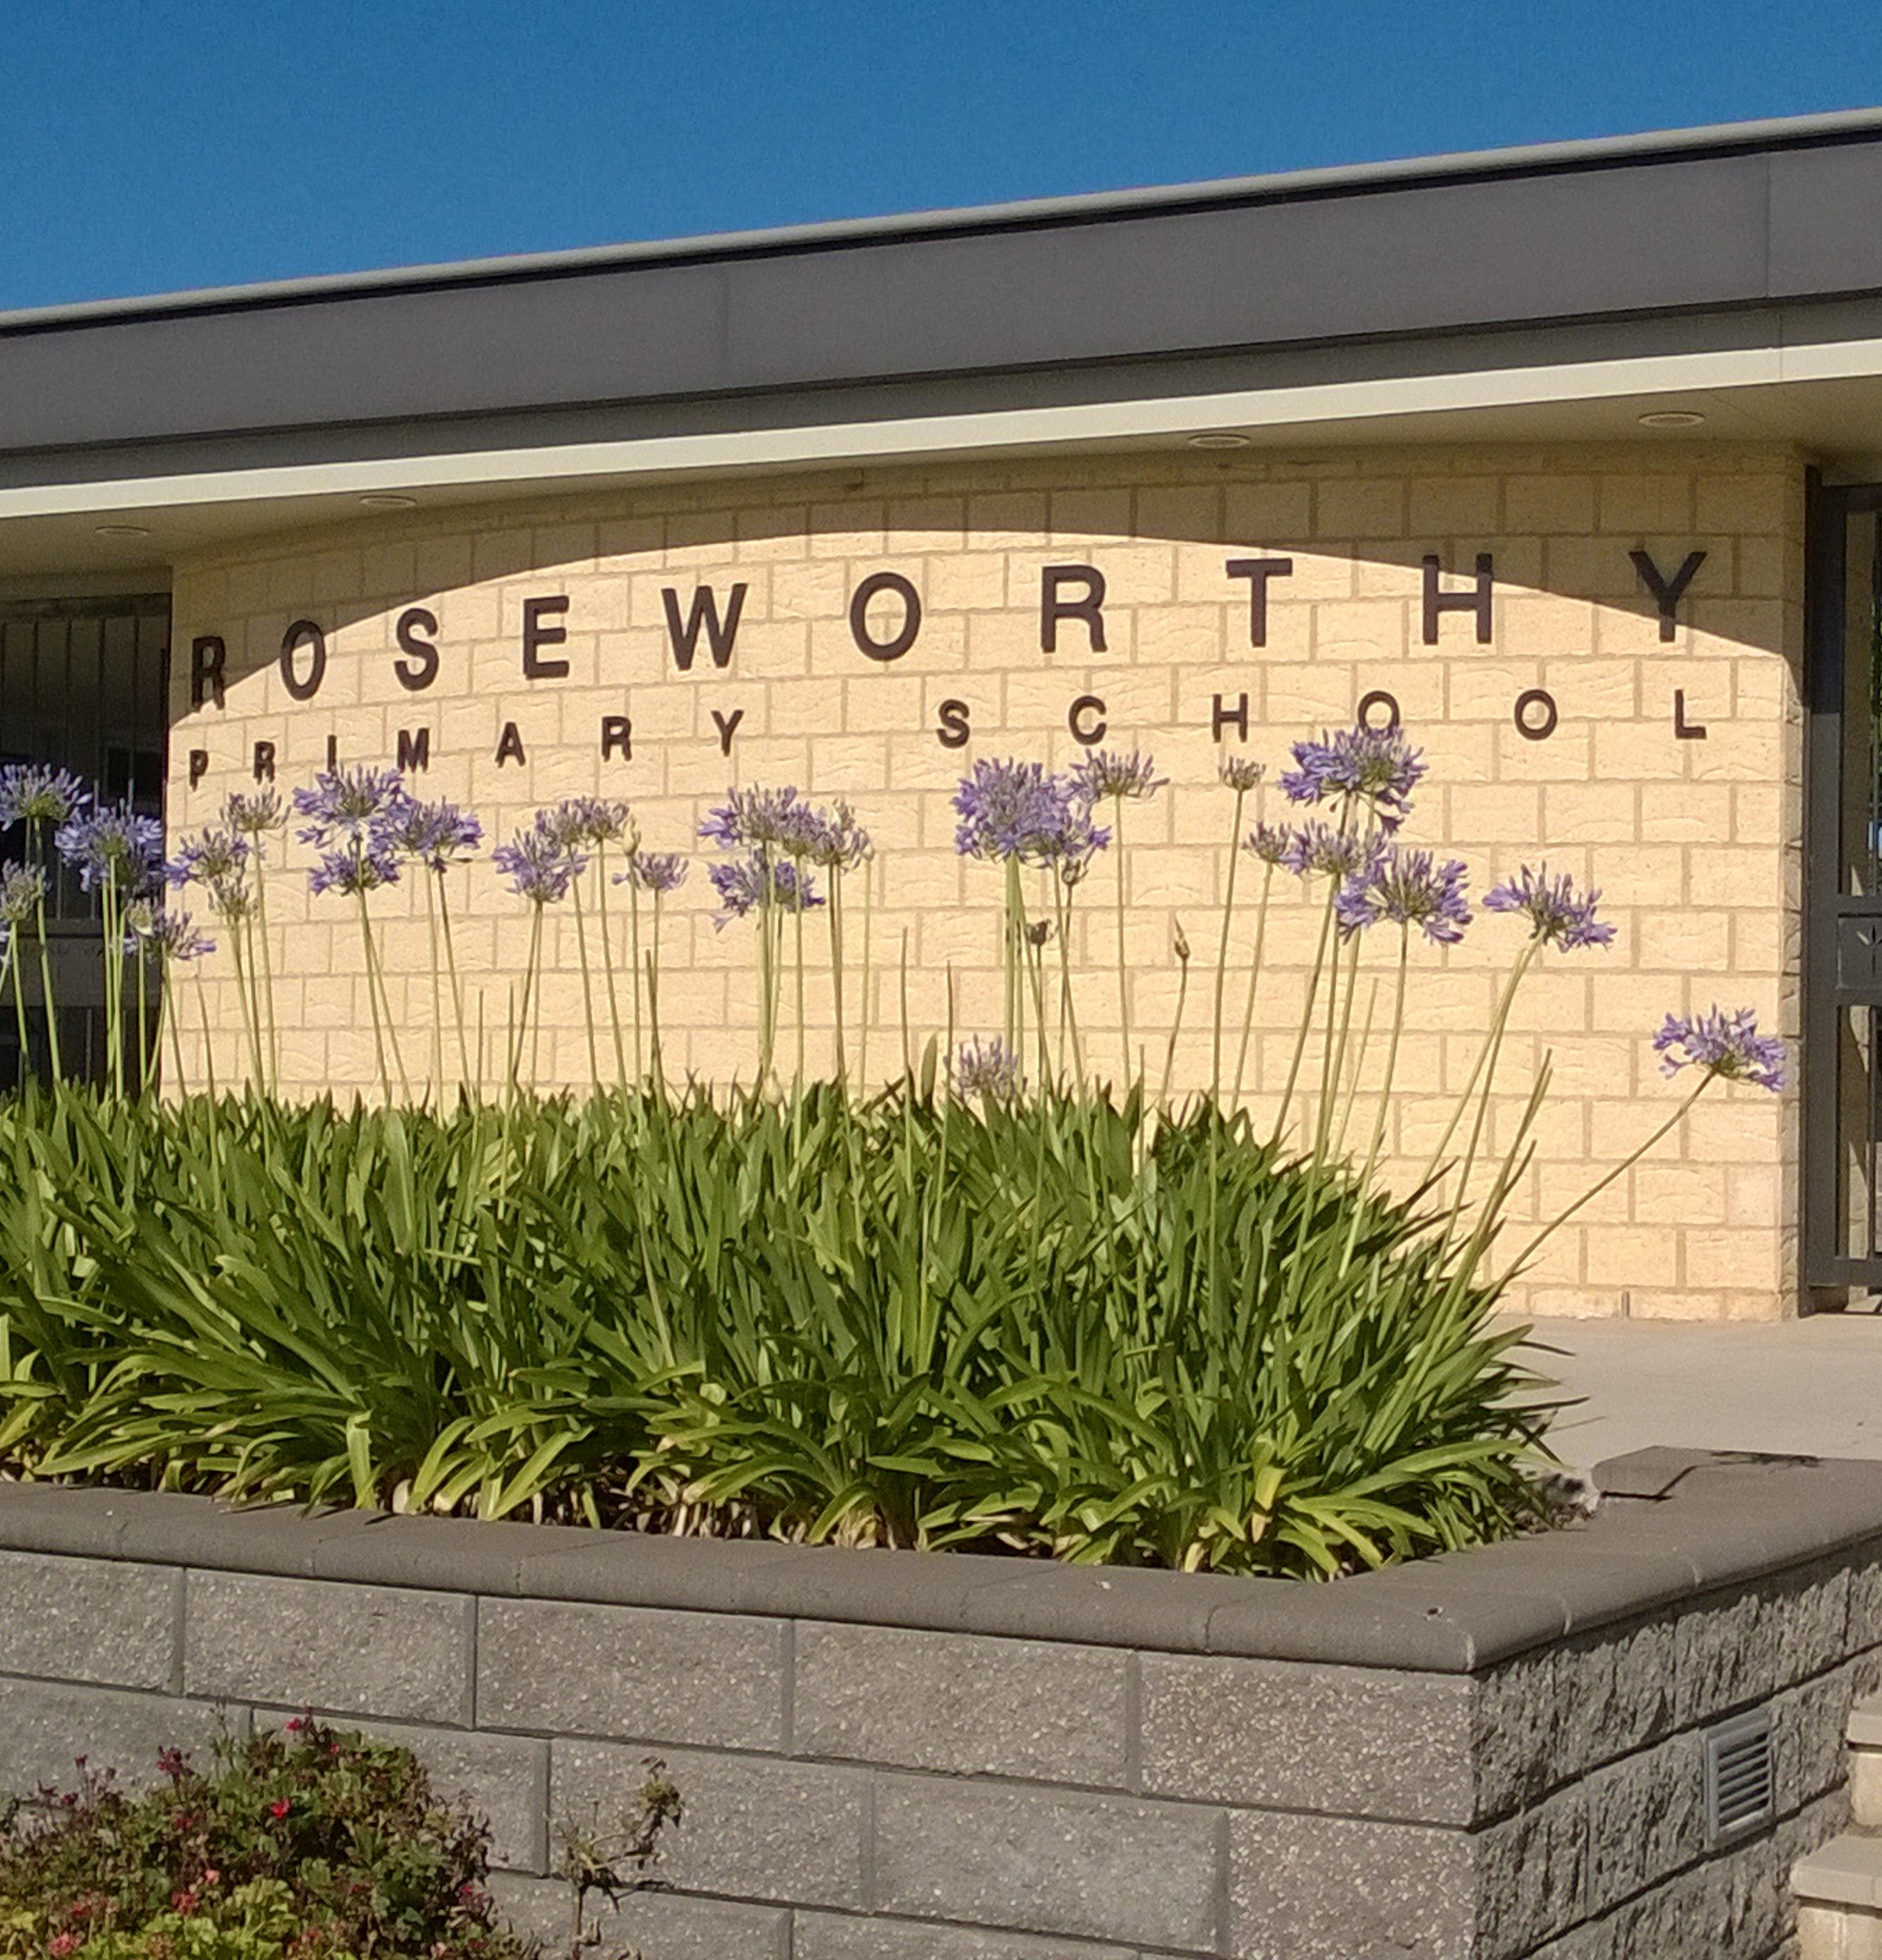 Photograph of Roseworthy Primary School - western entrance